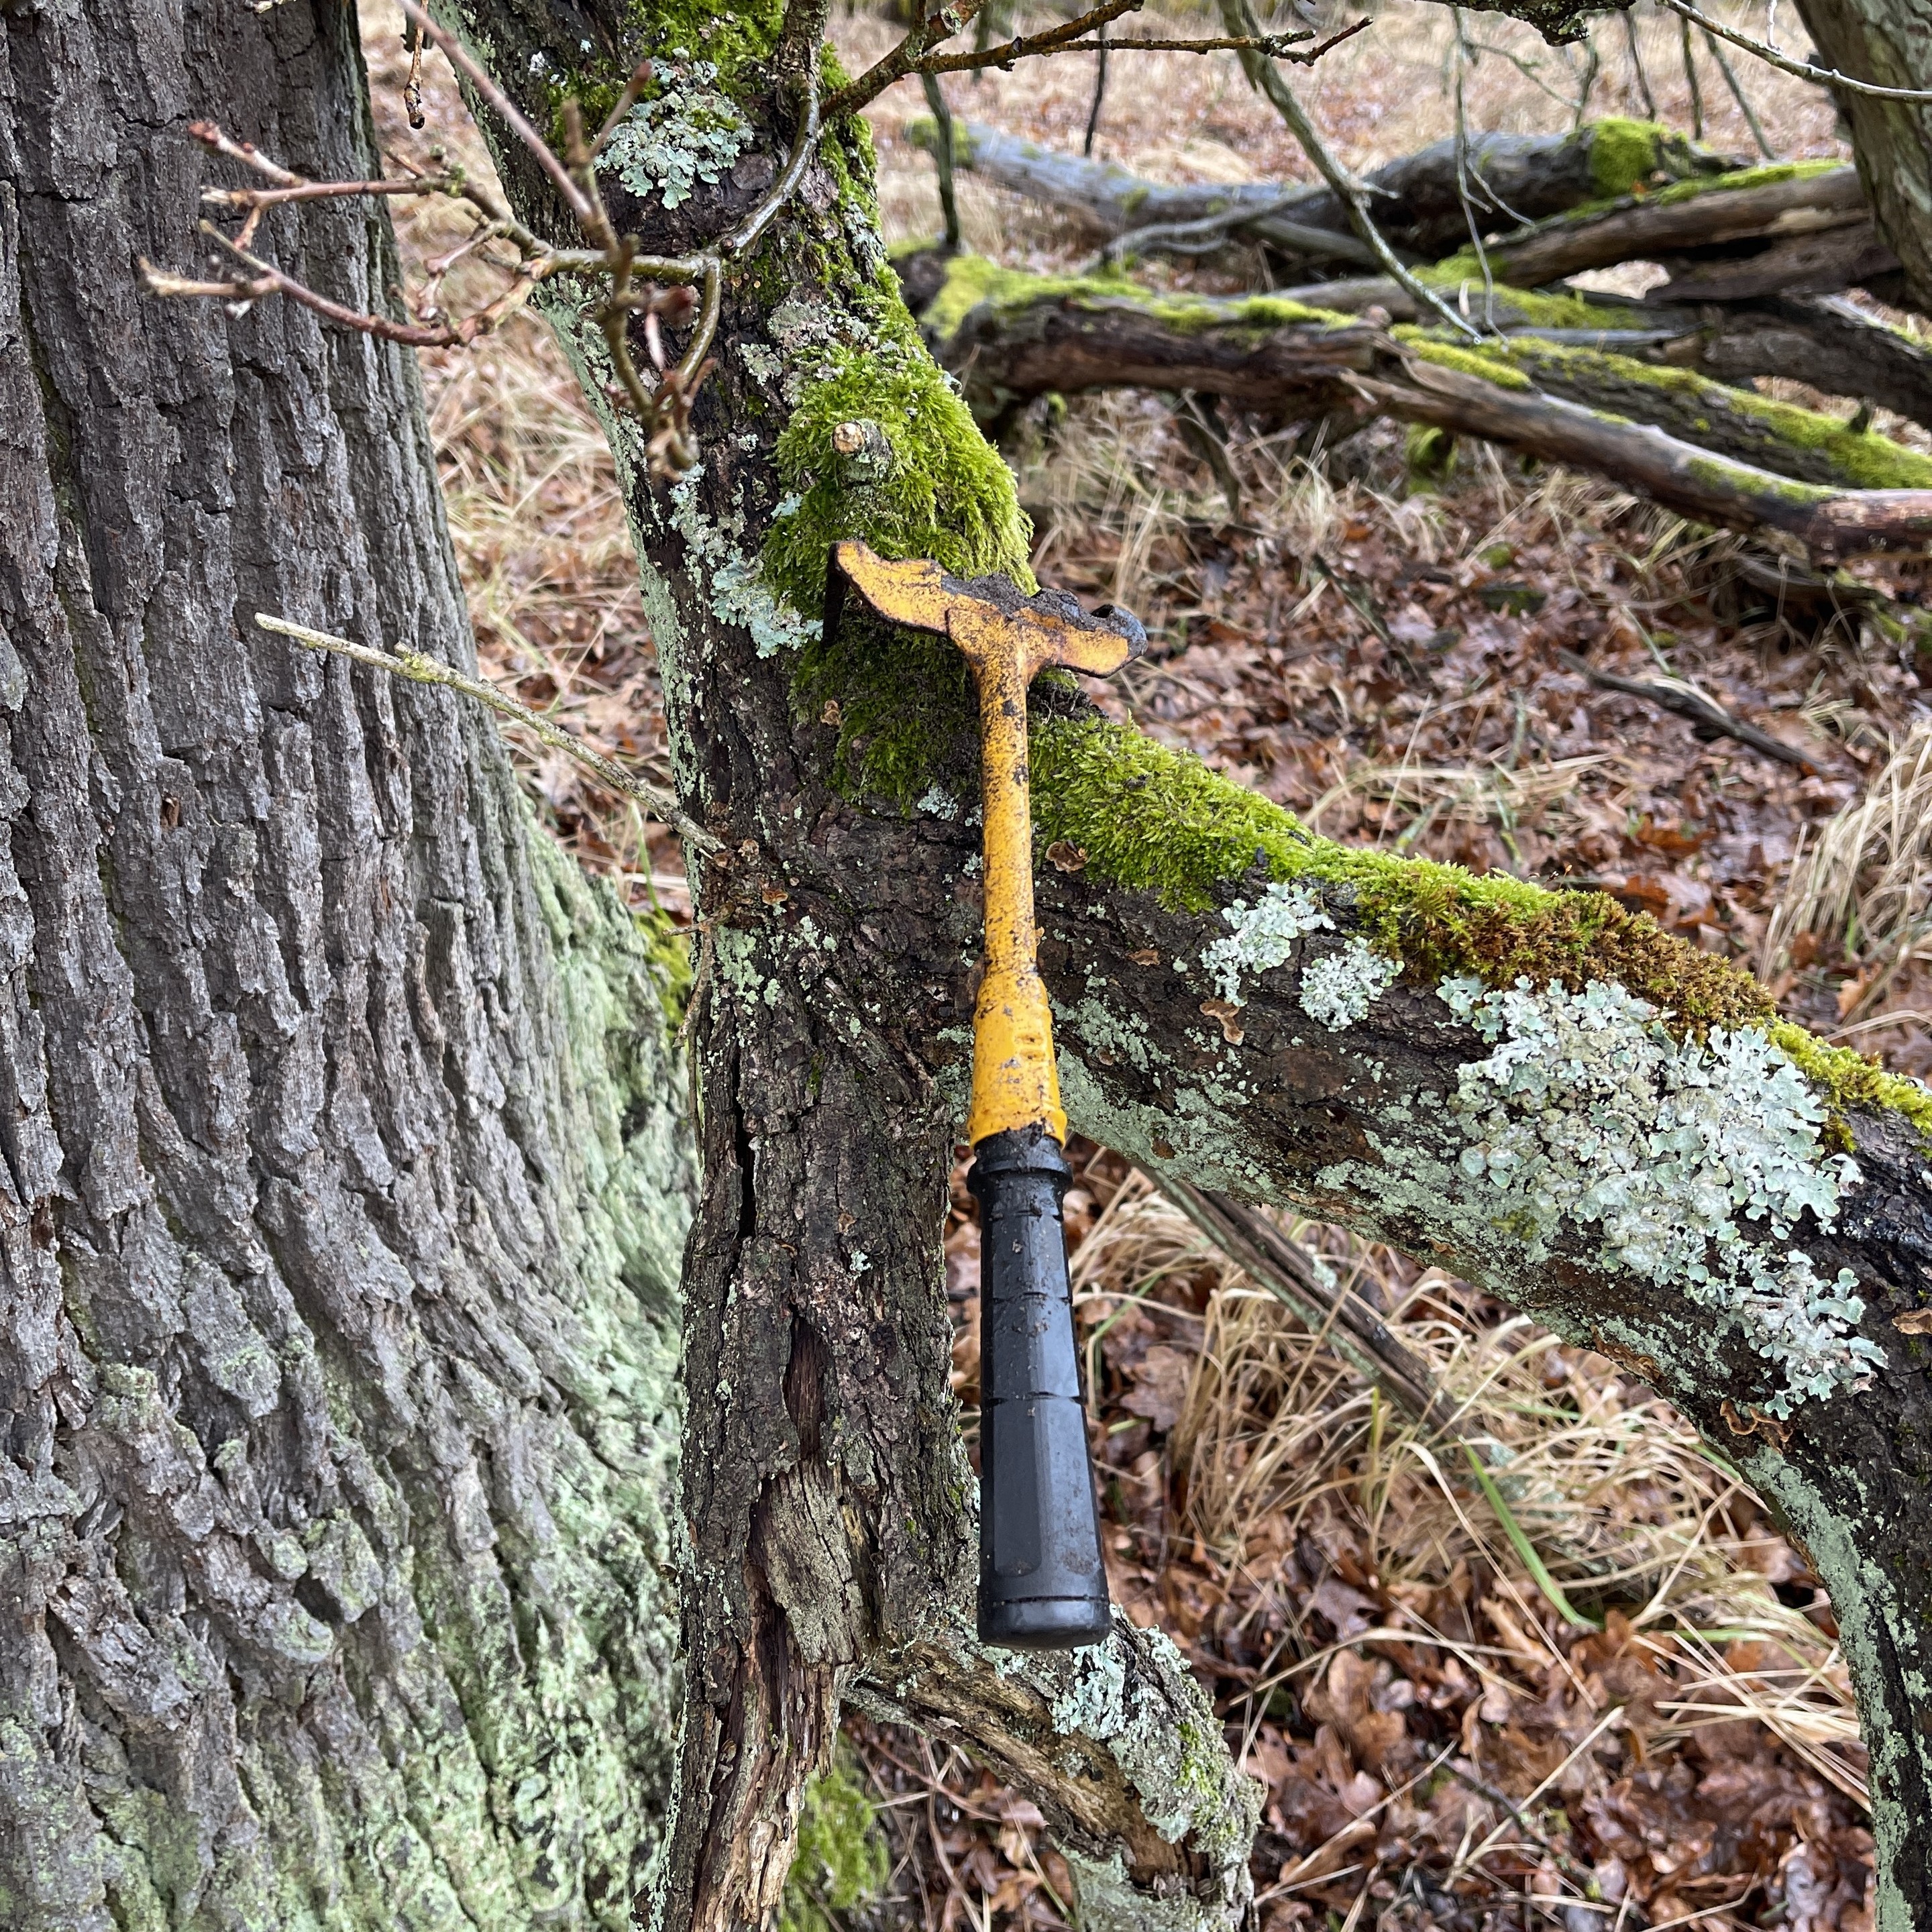 A weathered yellow and black rake resting on a moss-covered tree branch in the woods.